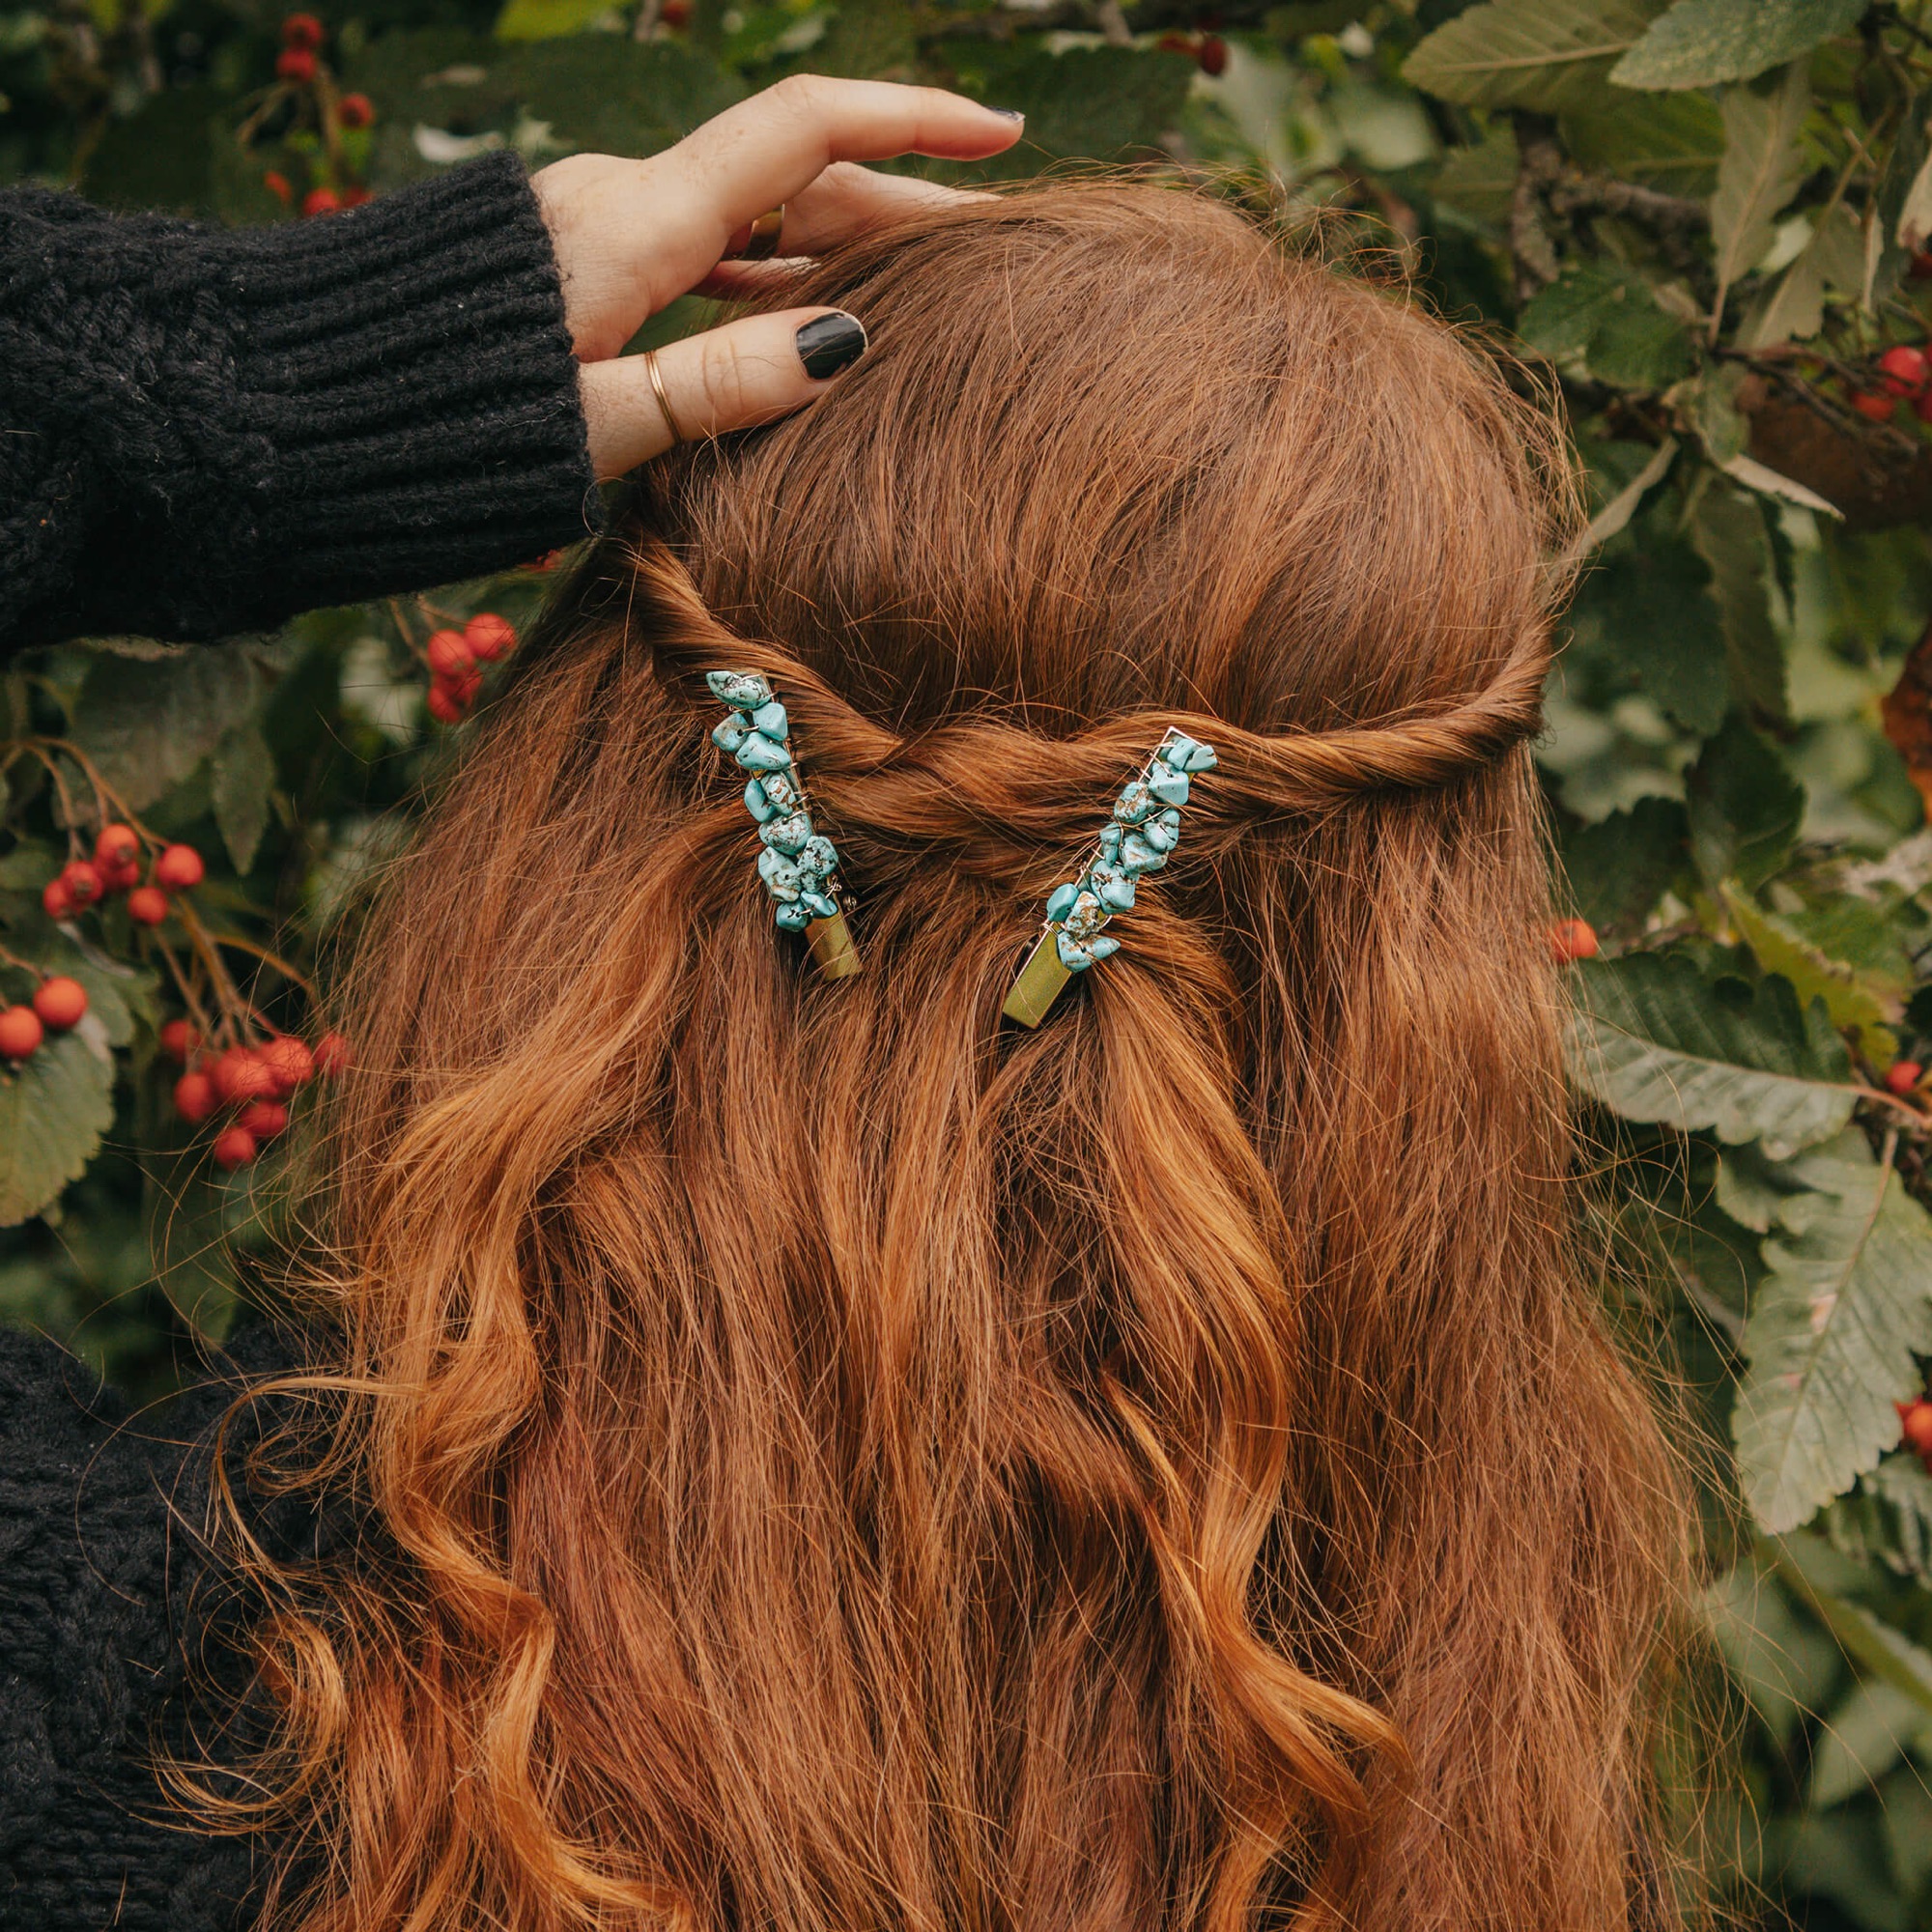 Turquoise Crystal Hair Clips by Xander Kostroma